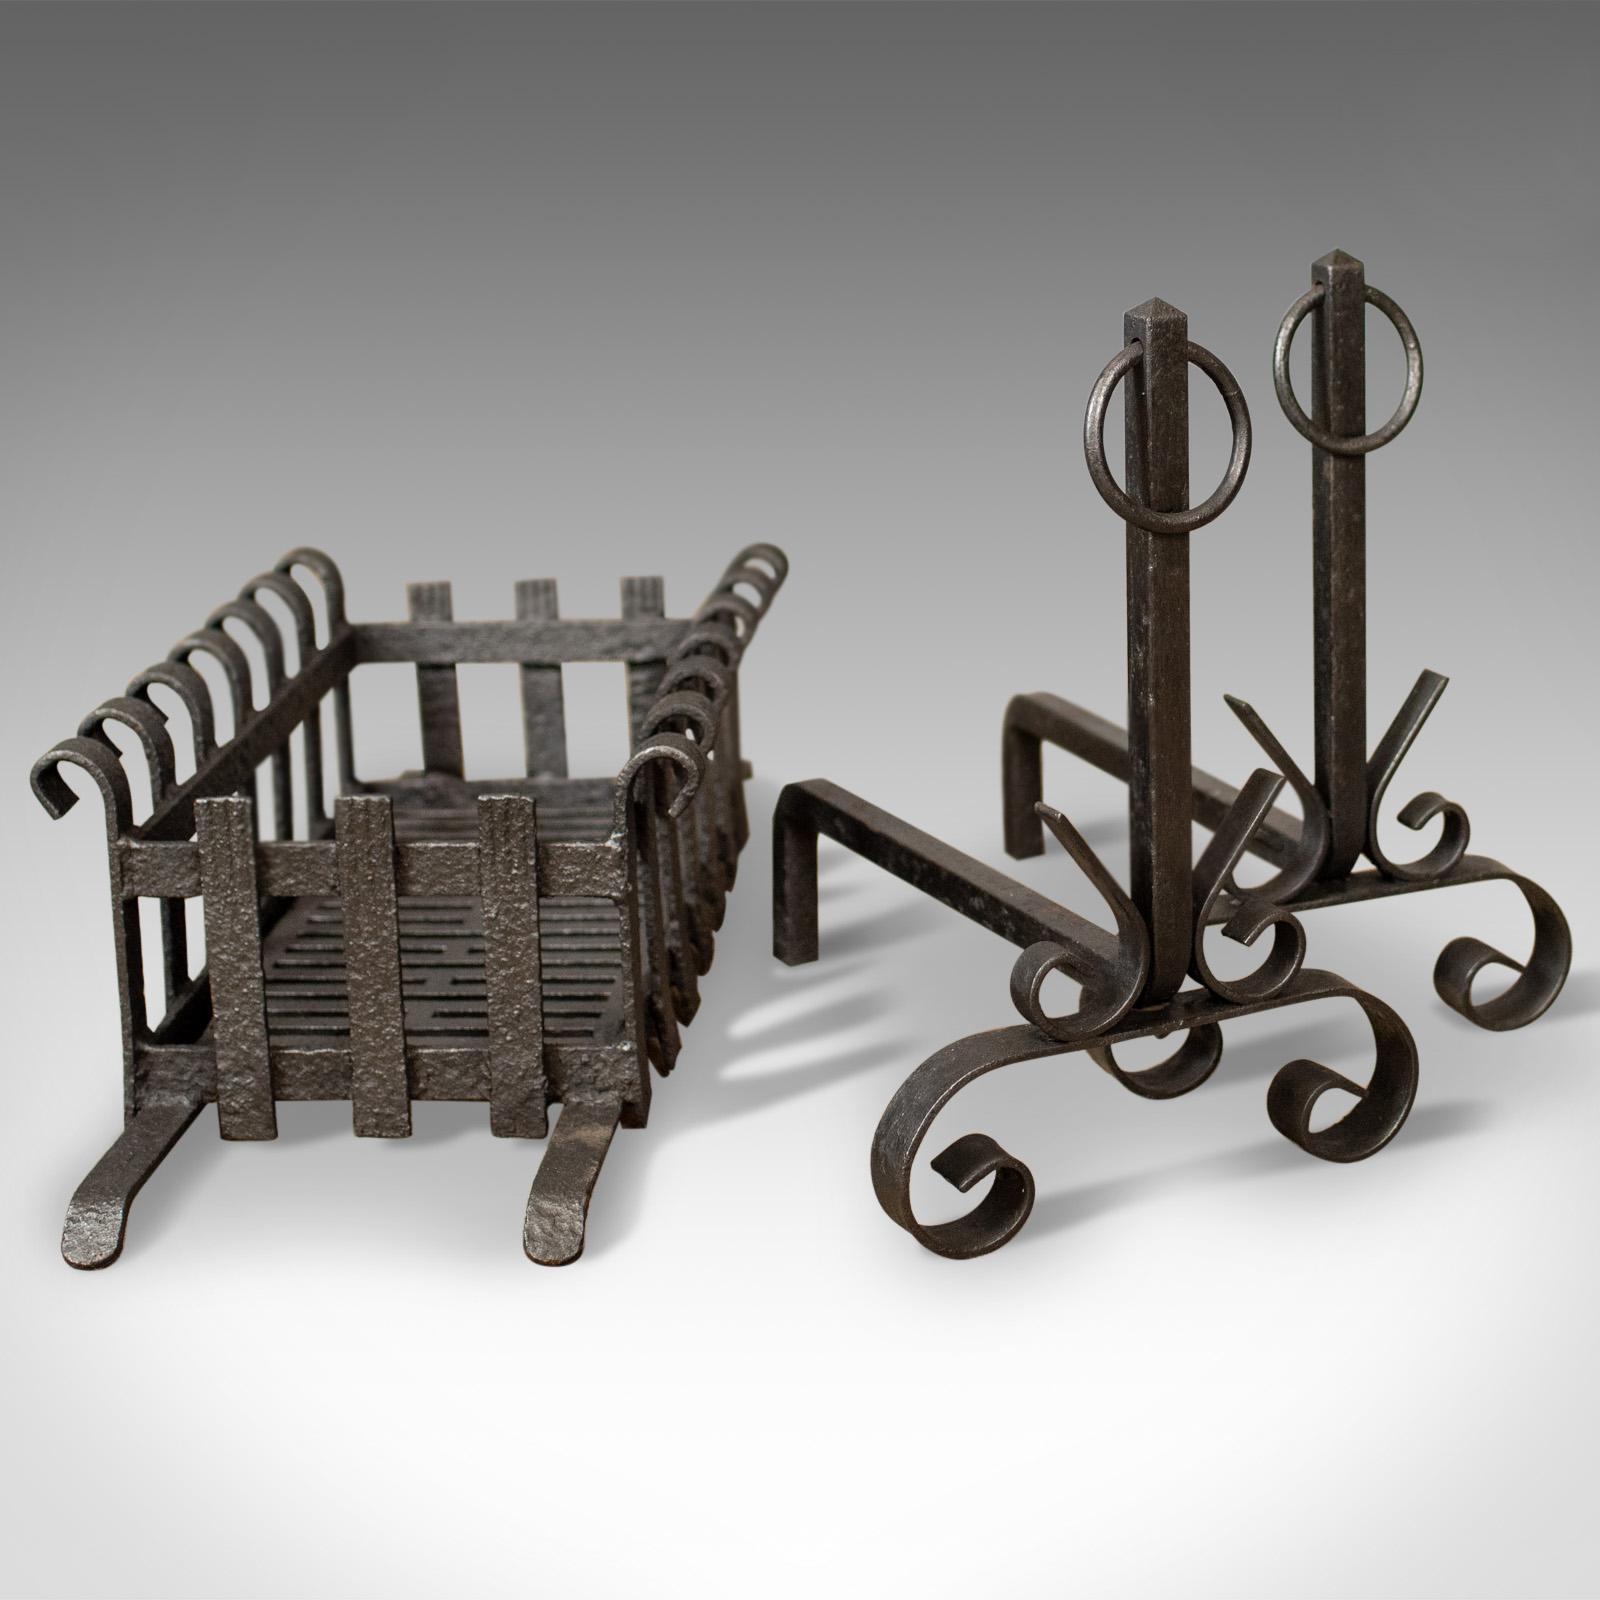 19th Century Antique Fire Basket on Andirons, Fire Dogs, English, Fireplace Grate, circa 1900